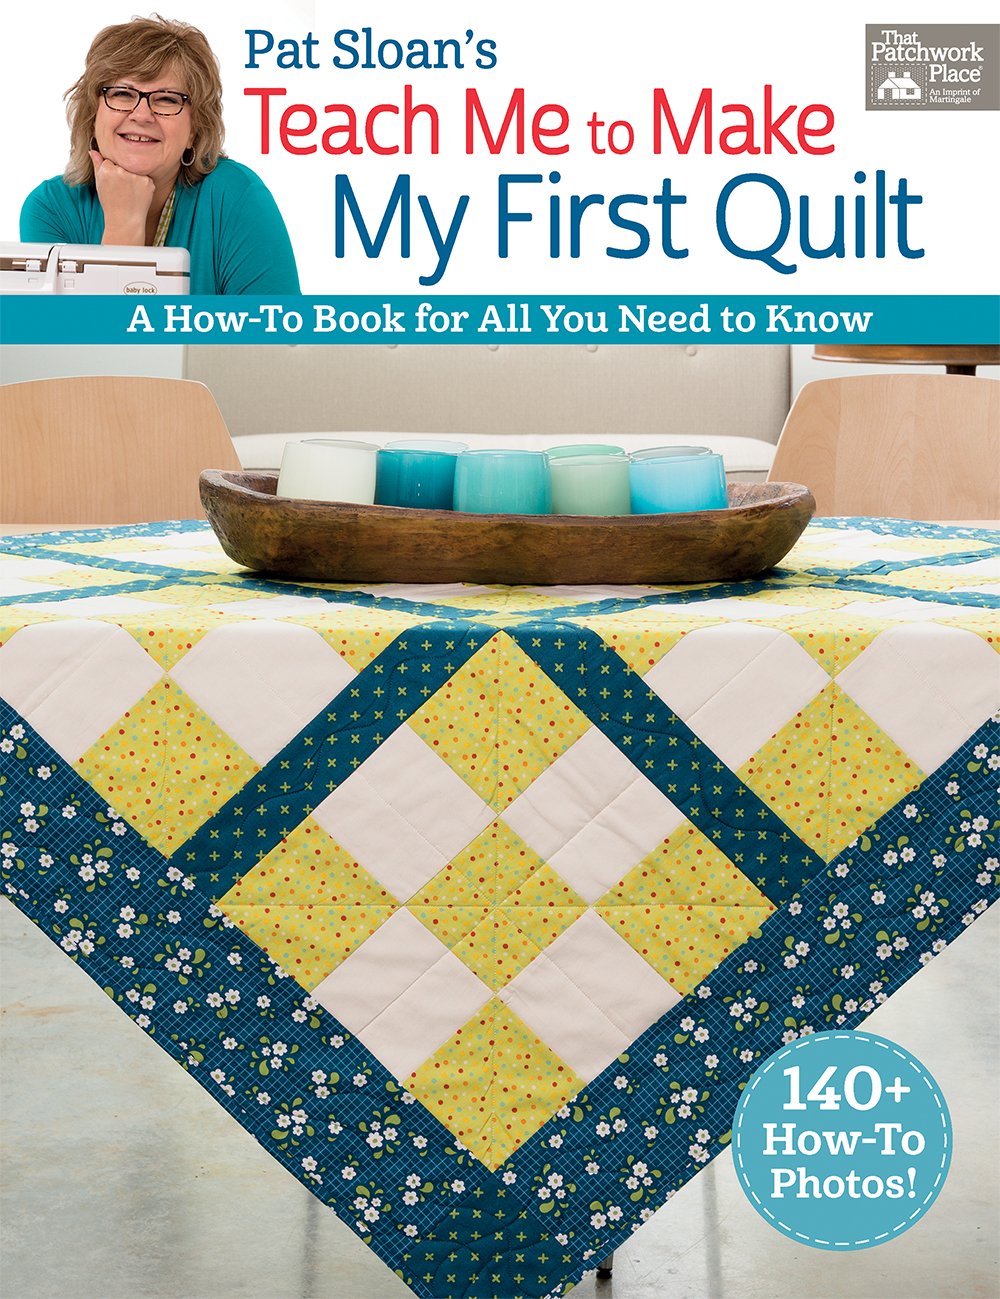 Pat Sloan's Teach Me to Make My First Quilt